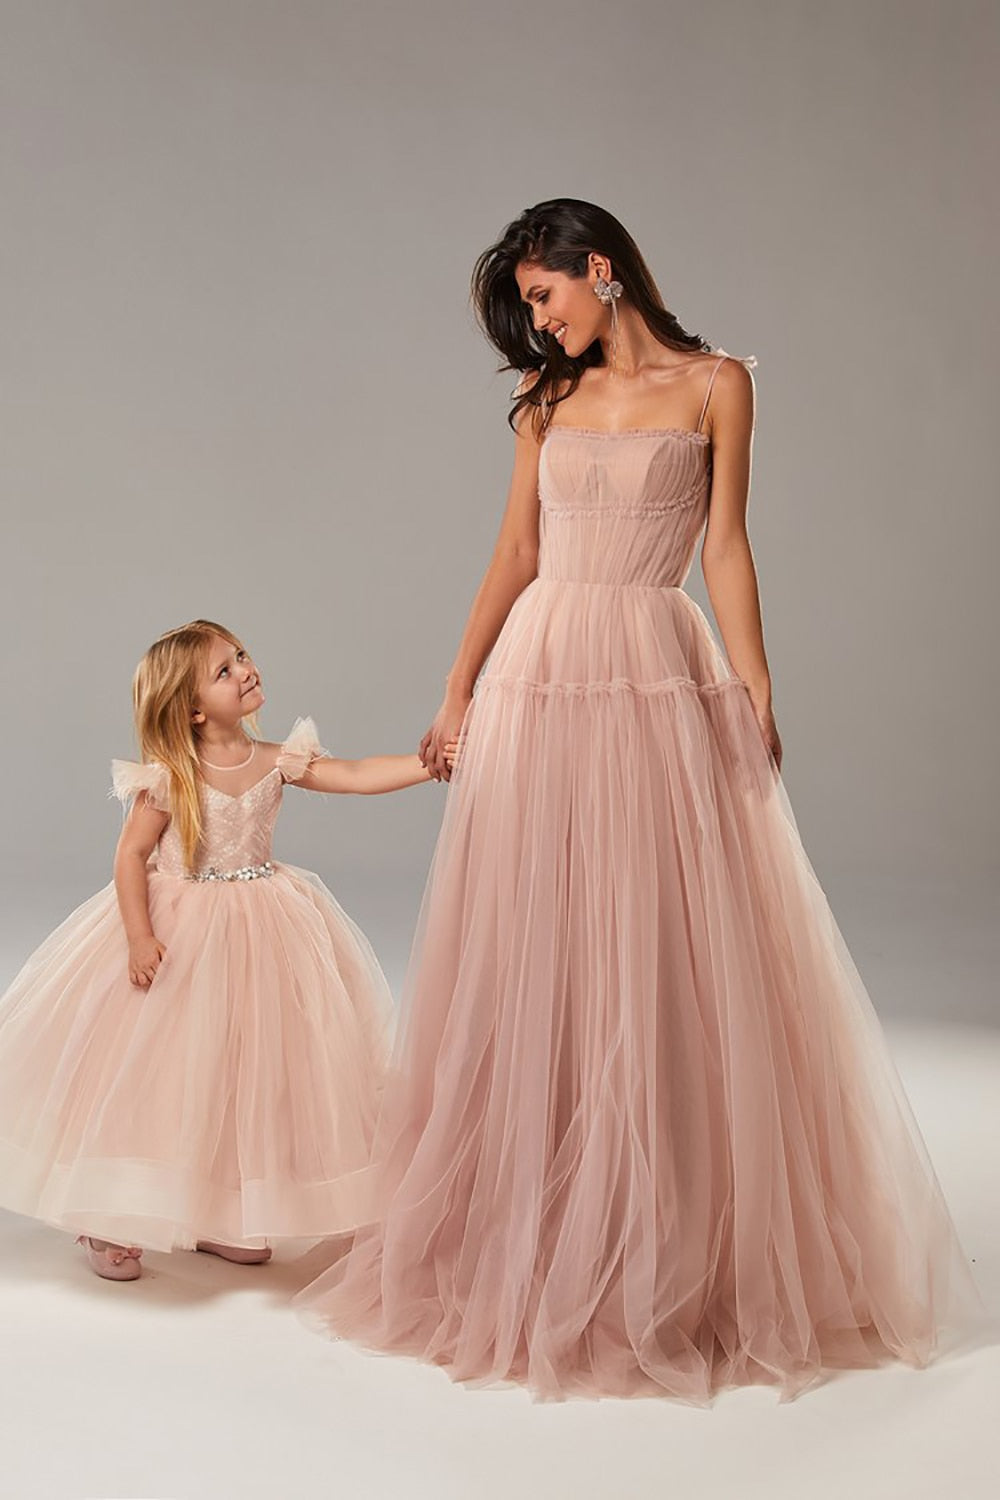 Cinessd  Blush Pink/Blue Long Prom Dresses 2022 Spaghetti Straps Tiered Skirt A-Line Party Dresses Pleated Tulle Formal Gowns